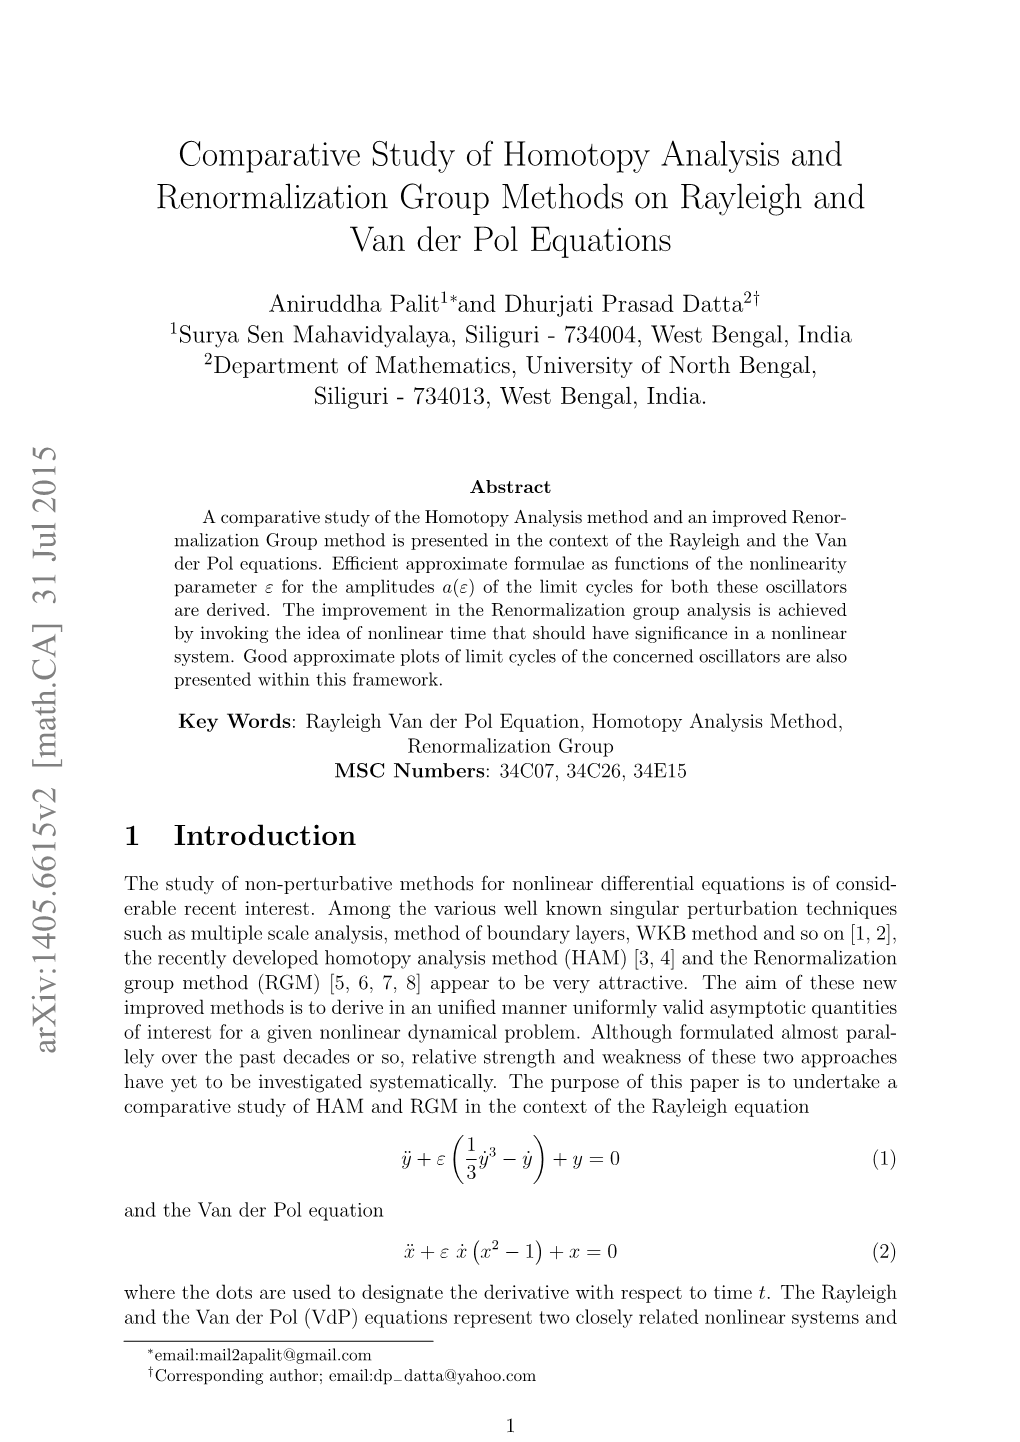 Comparative Study of Homotopy Analysis and Renormalization Group Methods on Rayleigh and Van Der Pol Equations Arxiv:1405.6615V2